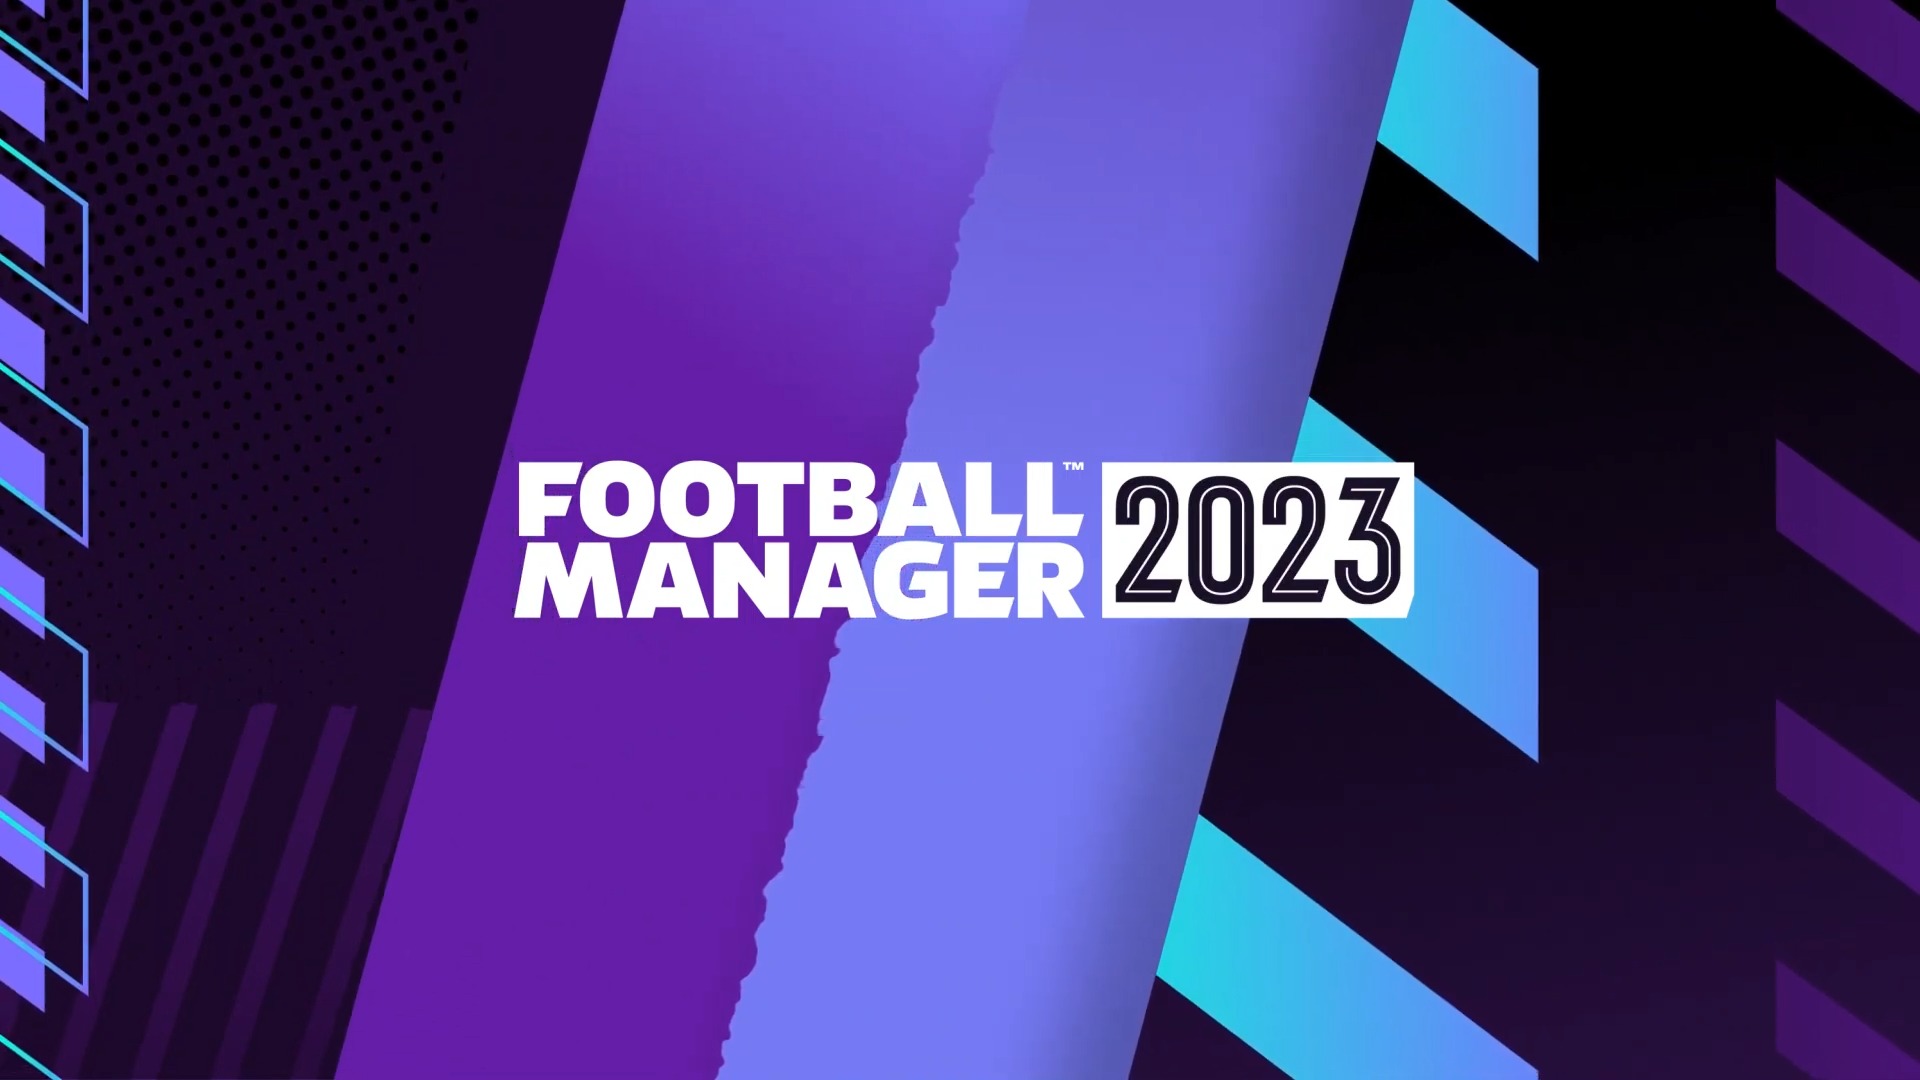 Football Manager 2023 finally released - AndroGaming